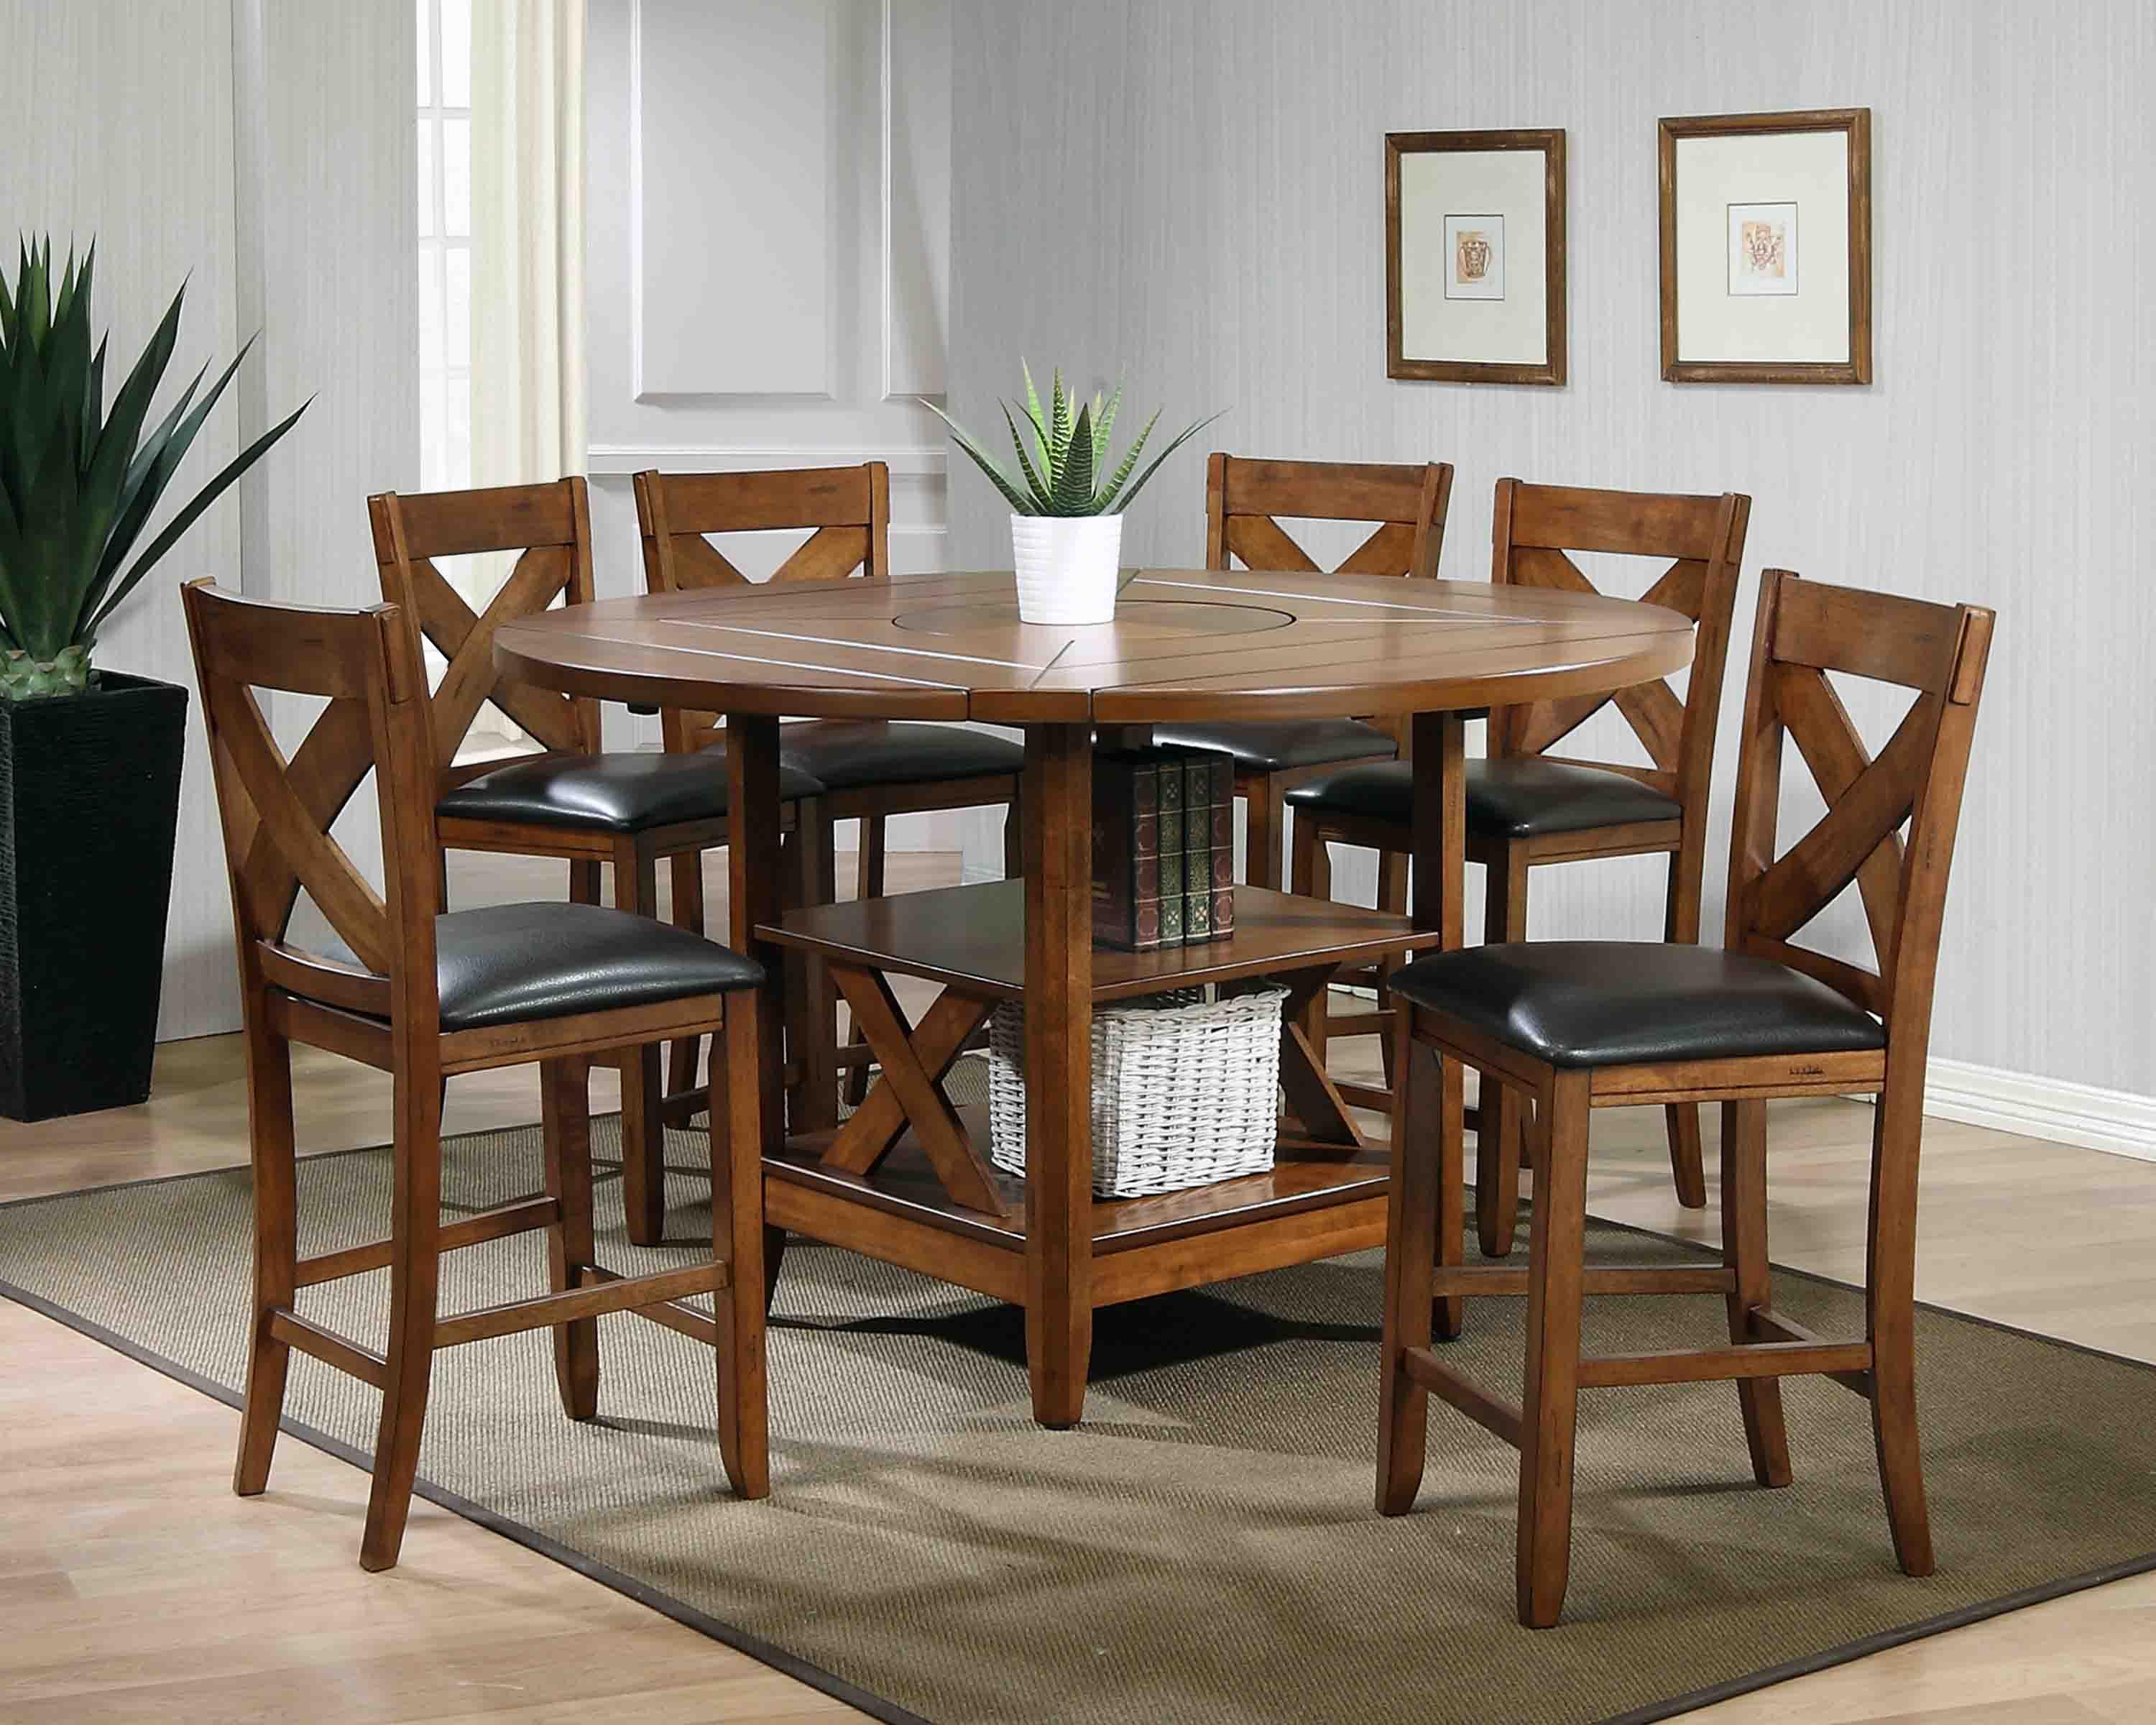 Contemporary, Transitional Dining Sets ALOD4660 ALOD4660 - Dining Set-5 in Black, Cherry Polyurethane